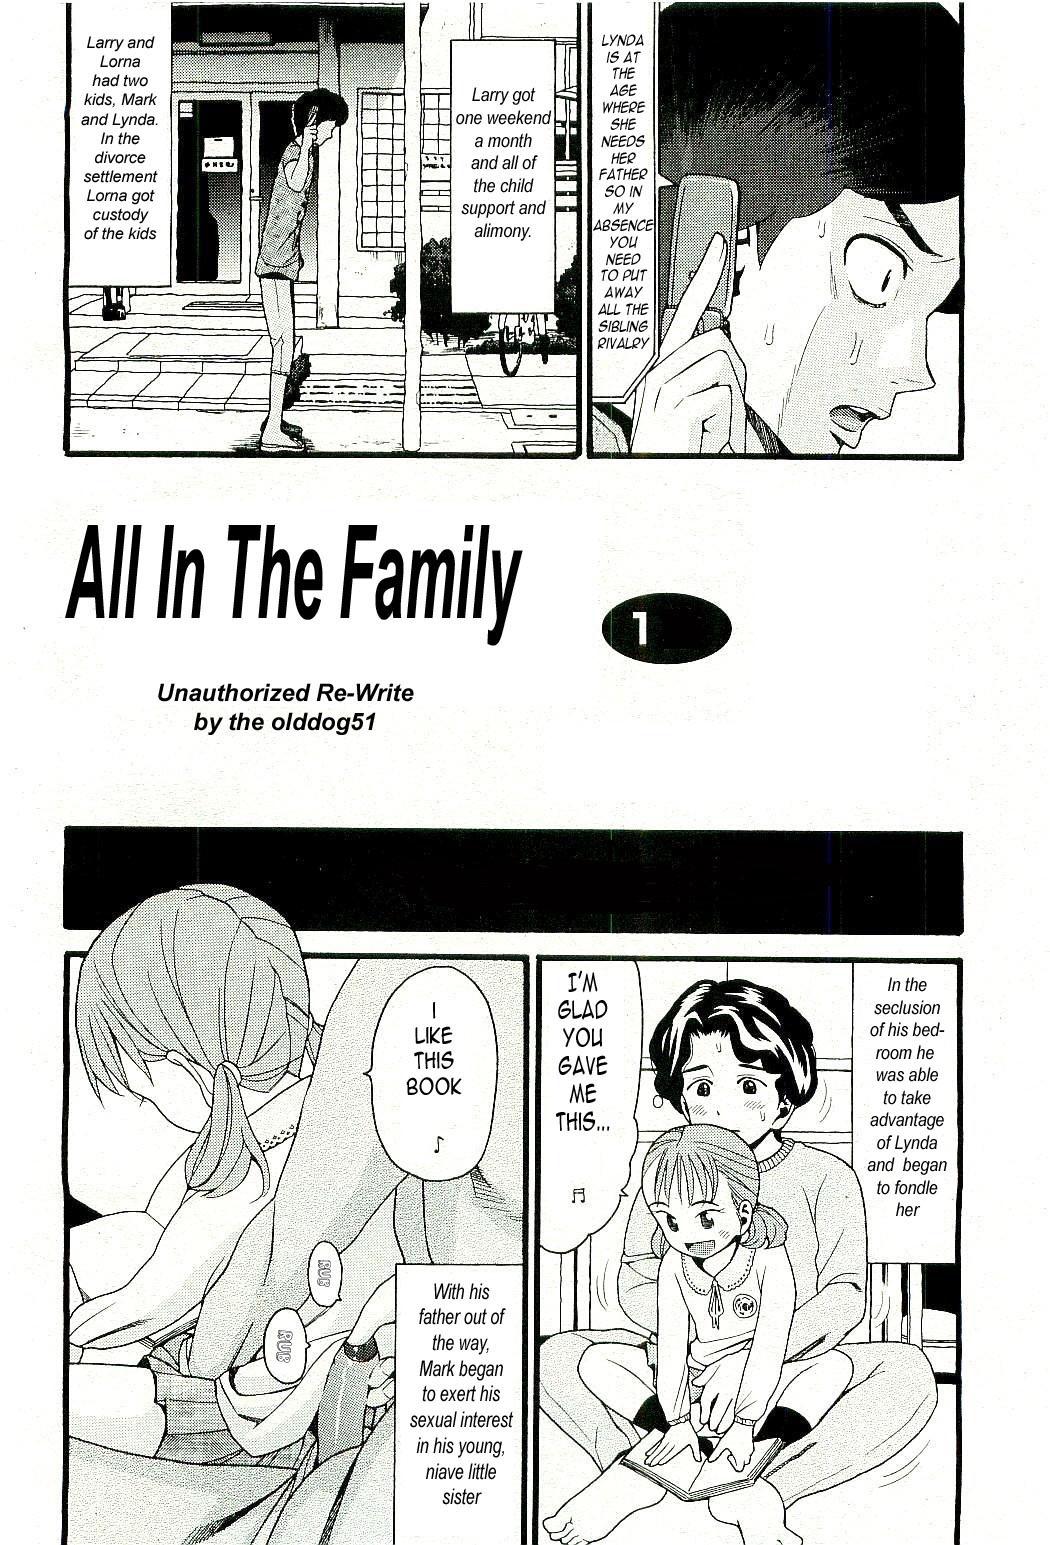 All In the Family - Part 1 1